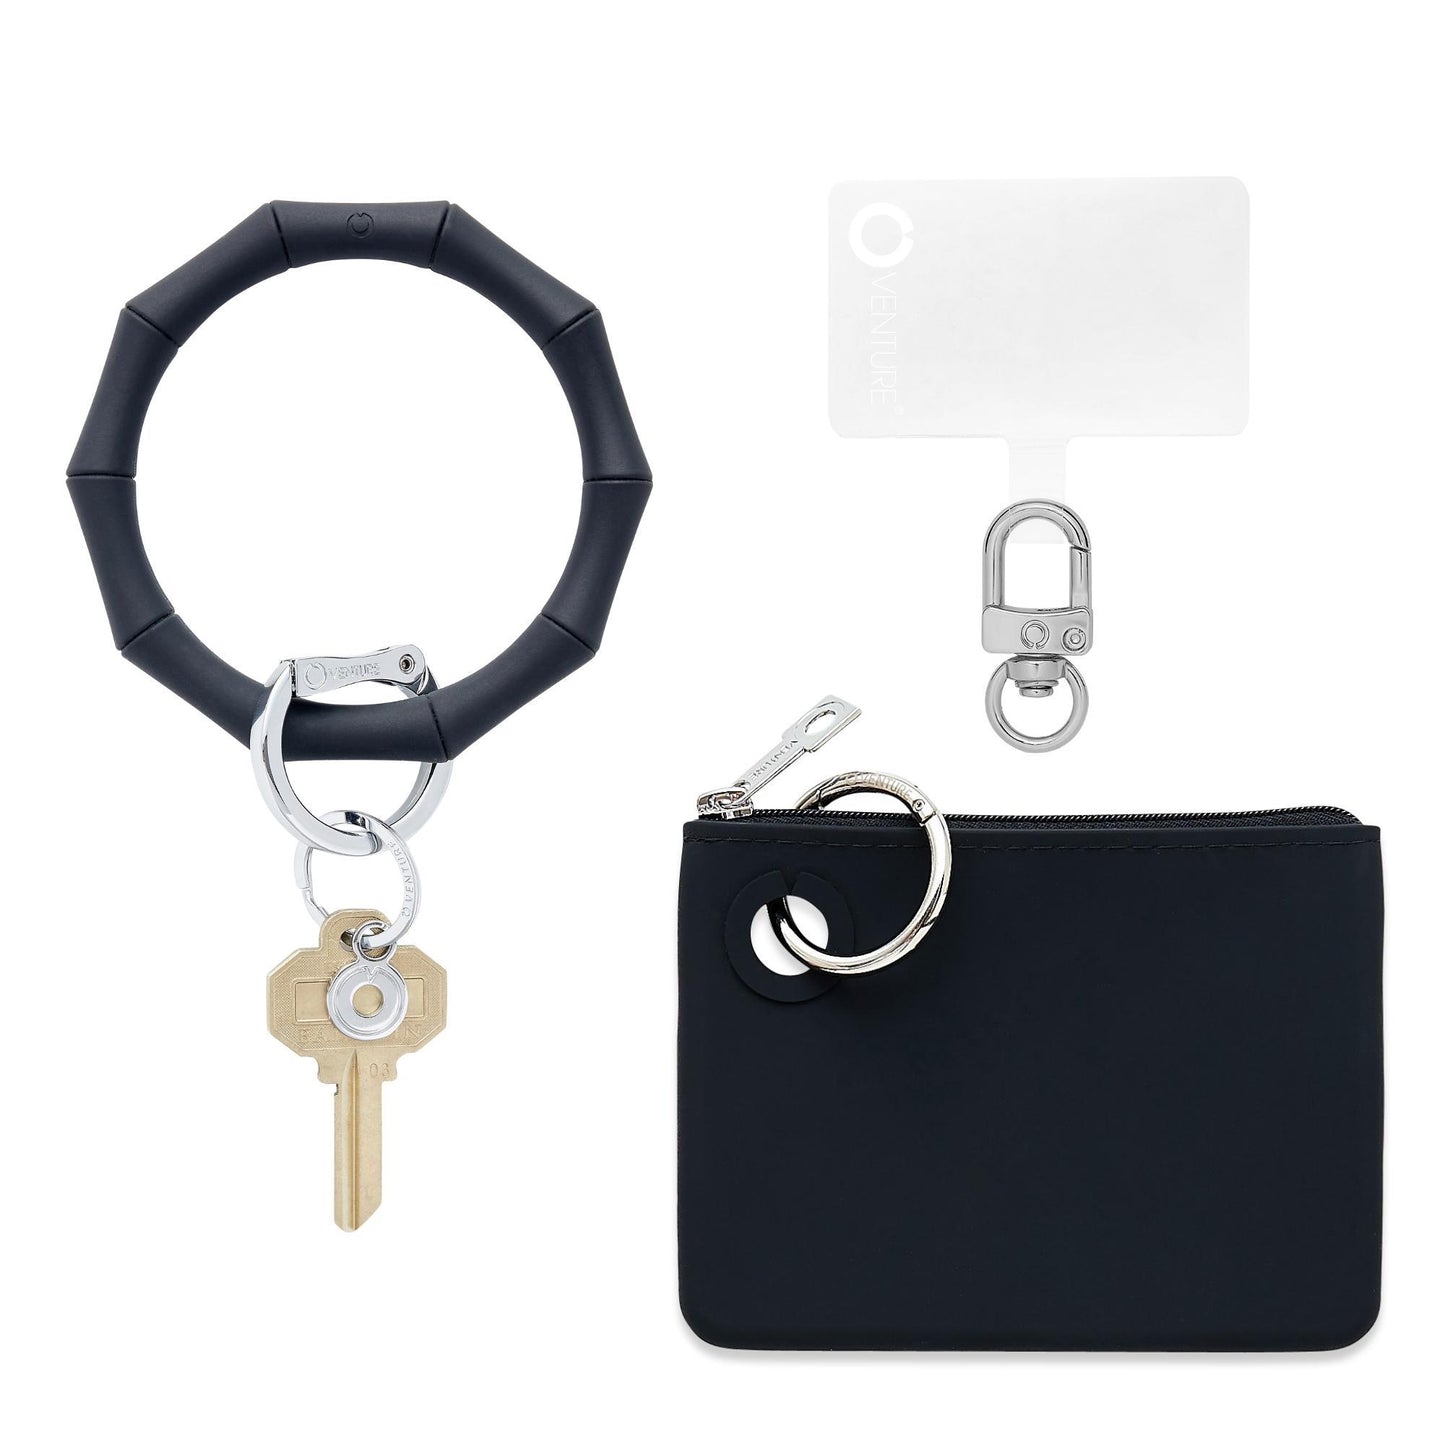 3-in-1 Black Bamboo Silicone Set - This set includes a black bamboo silicone big o key ring and a silicone pouch in black with a hook me up phone connector